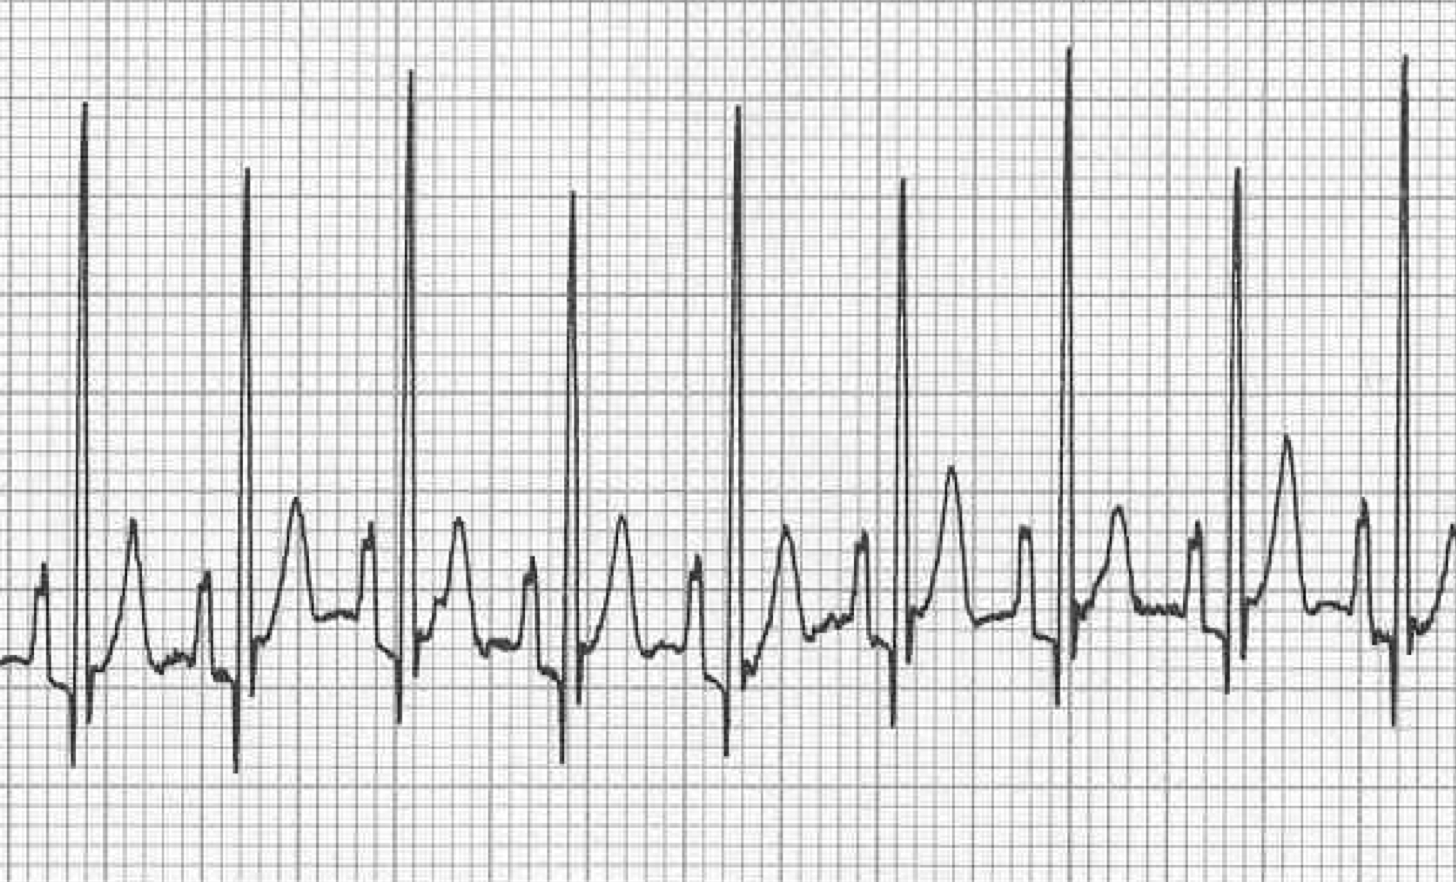 Figure 4: Lead II electrocardiogram showing atrial tachycardia with an average heart rate of 180 bpm. Additionally, the 1:1 variation in R-wave amplitude is consistent with a diagnosis of electrical alternations, a common finding in patients with large volume pericardial effusion.